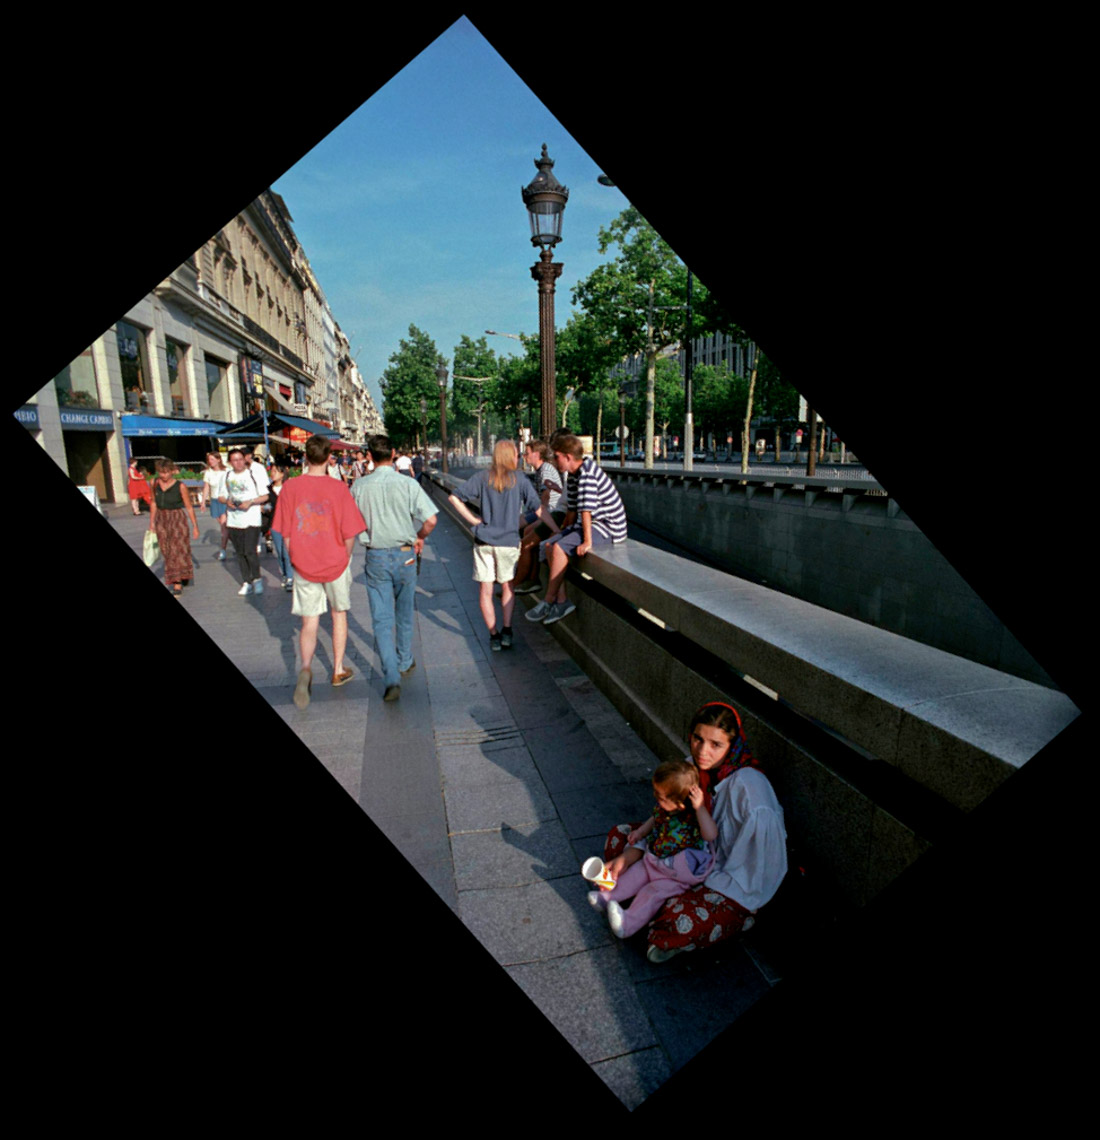 "Gypsy with Child, Champs-Elysées",  1997, © Lewis Rogers, Contemporary Art Photography,  Contemporary Photography, Color Film Photography, 20th Century Photography, Photo-Sequence, Diptych Photography, Polyptych Photography,Triptych Photography, Postmodern Photography, 1990’s Photography, Constructivism Photography